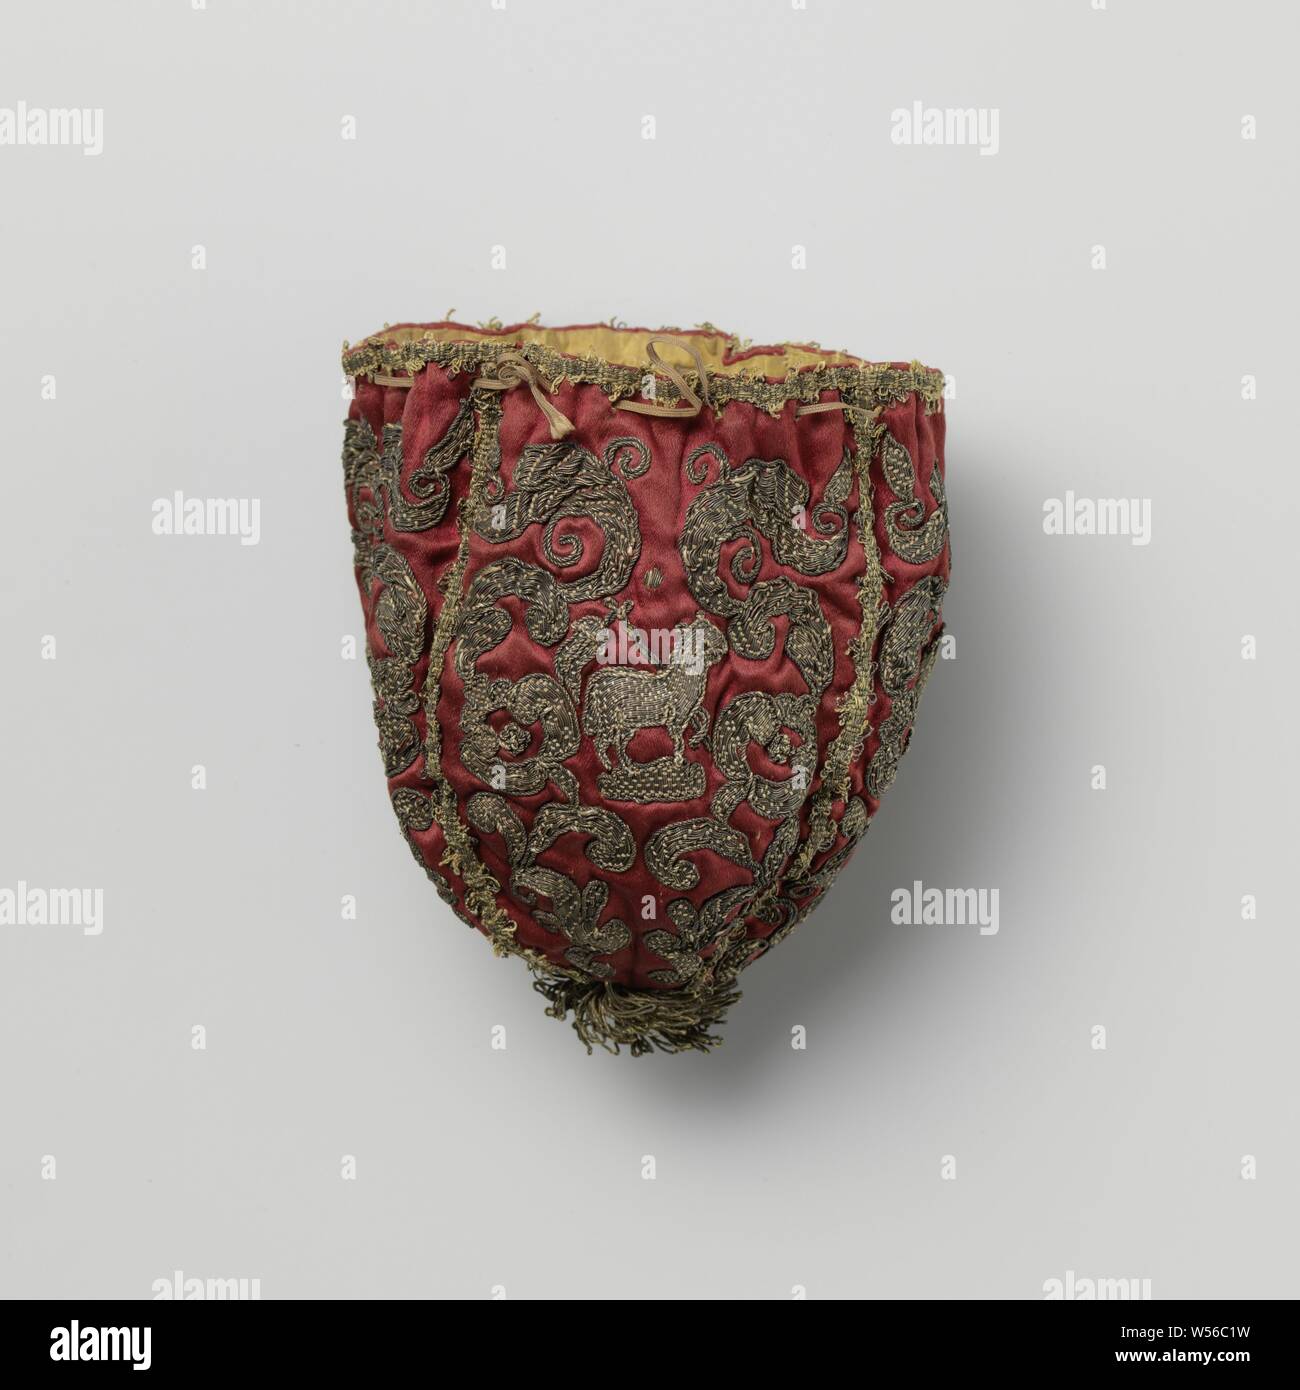 Bursa, dark red, decorated with ecclesiastical symbols in sewn-on gold thread, including Cross-bearing Lamb of God, composed of four parts. Decoration of sewn-on gold thread: twice a heart, a cross-bearing Lamb of God and a flamed globe on chalice, all within a floral frame. At the top a drawstring, at the bottom a tassel of gold thread. Lined with yellow silk., anonymous, Europe, c. 1600 - c. 1699, iron (metal), h 13 cm Stock Photo